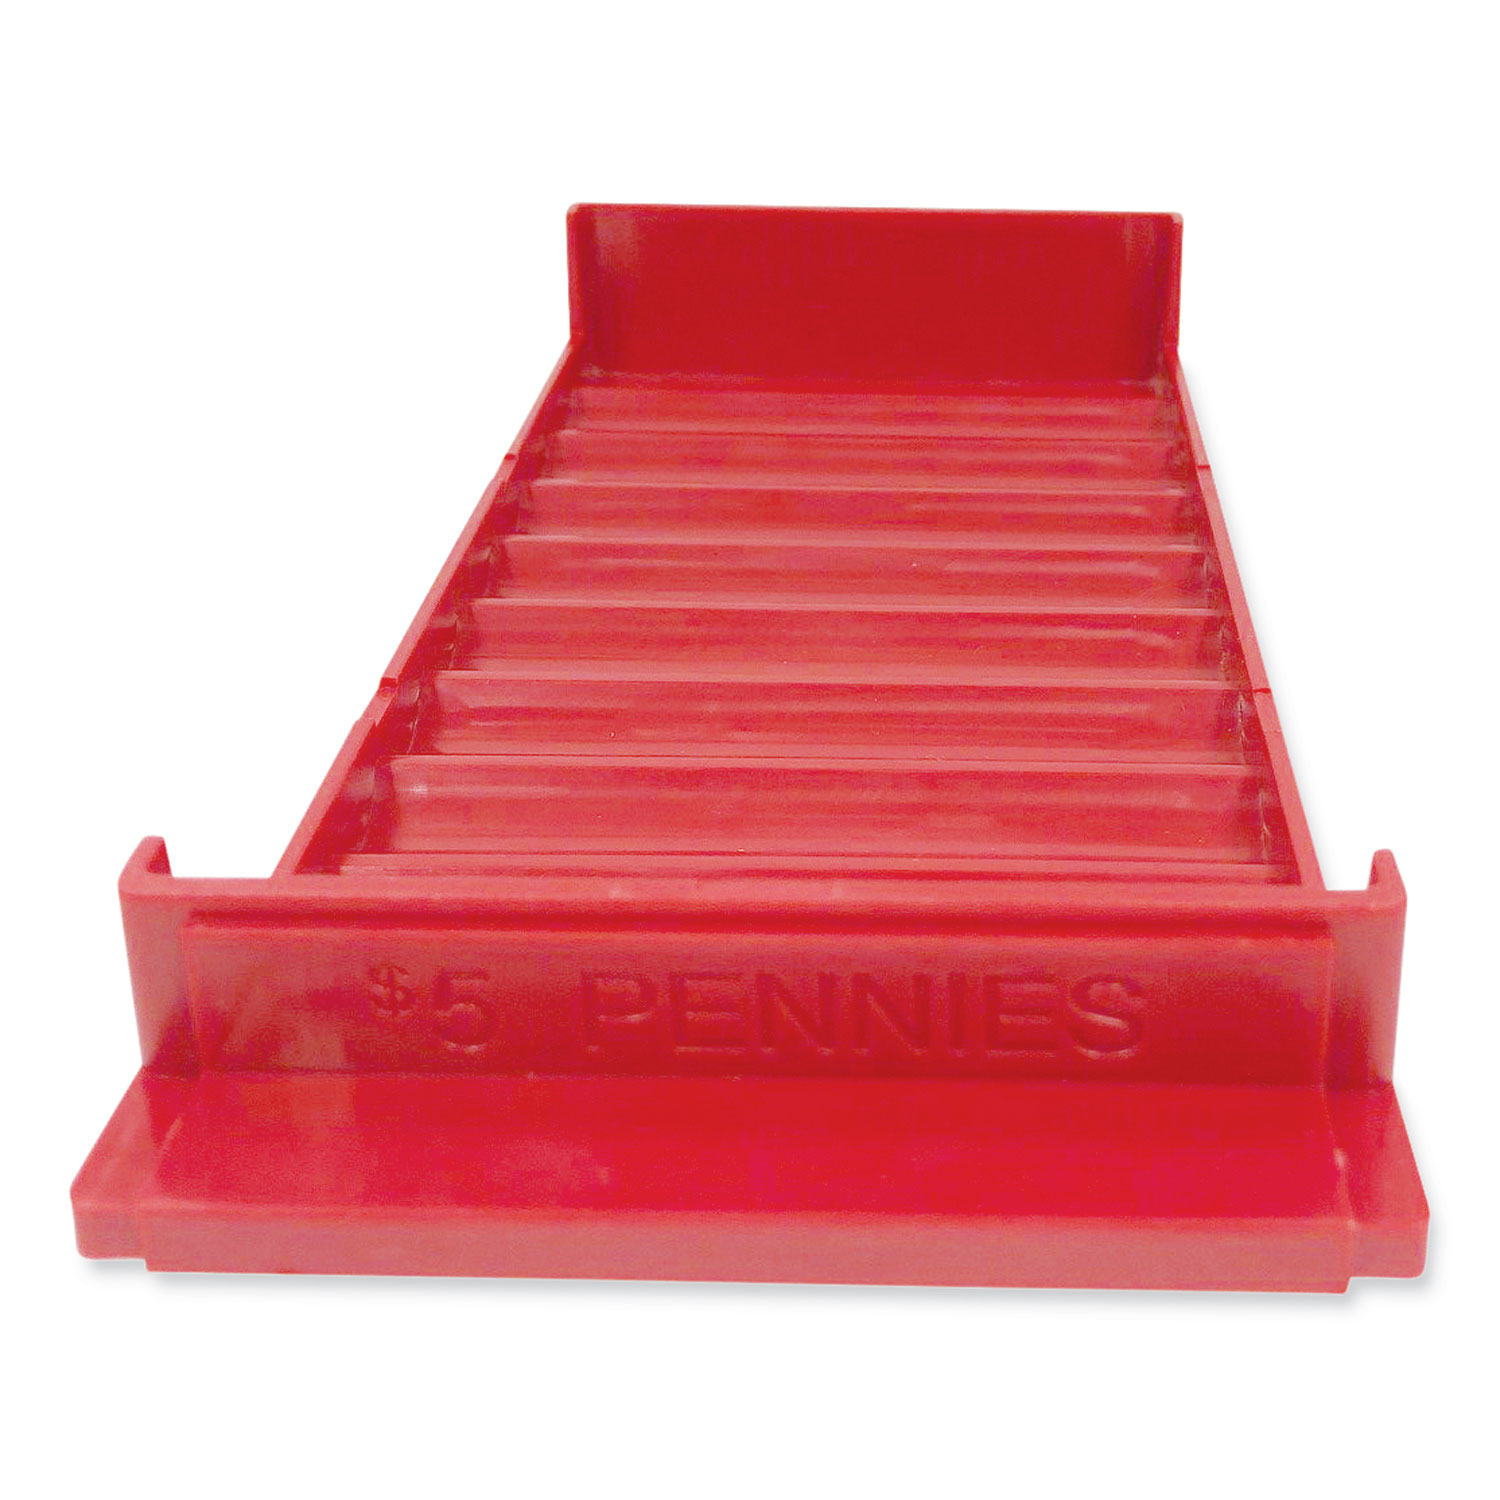  CONTROLTEK 560560 Stackable Plastic Coin Tray, Pennies, 3.75 x 11.5 x 1.5, Red, 2/Pack (CNK560560) 